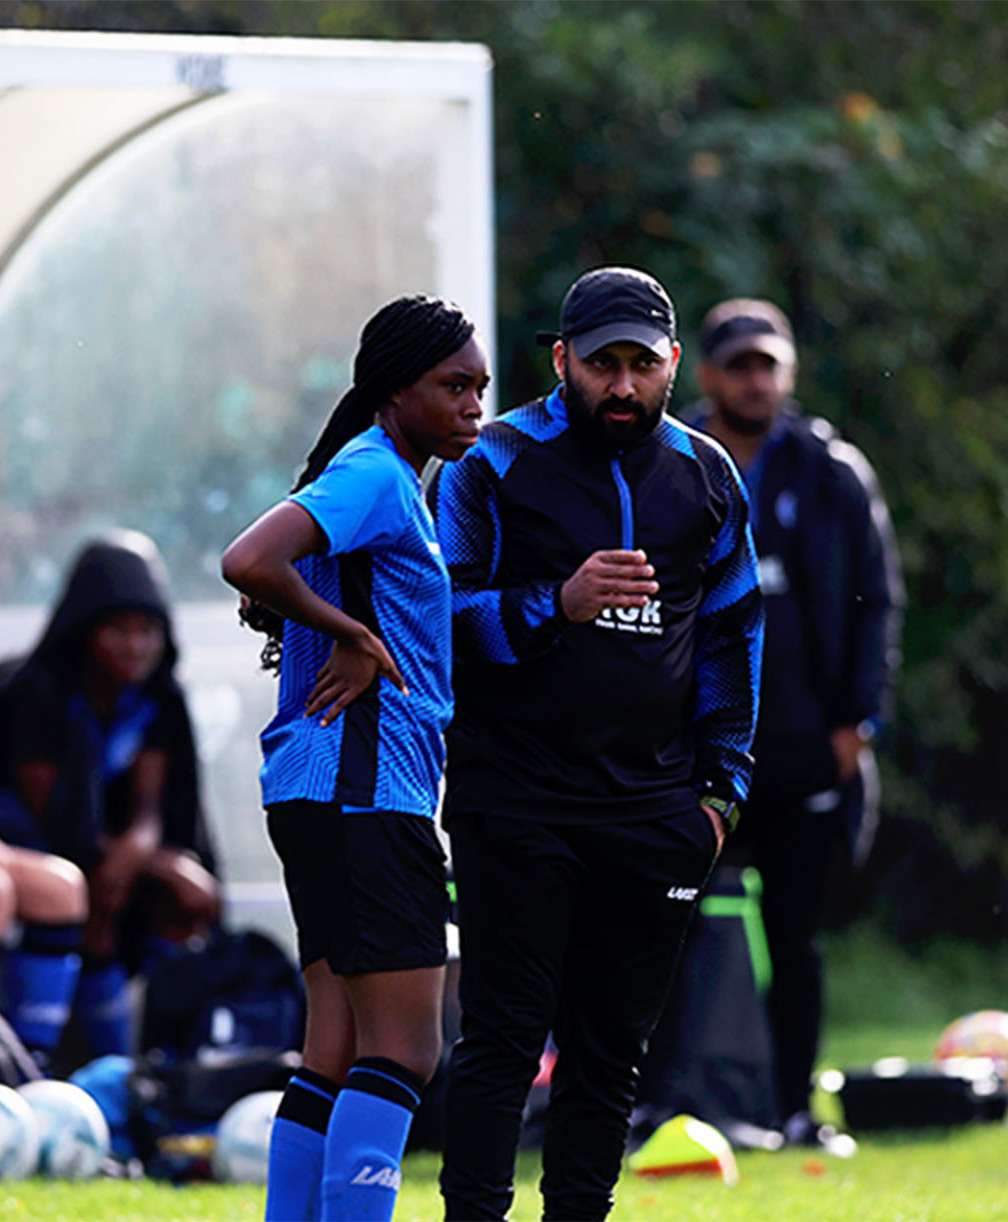 A player listens to her coach as he provides some instructions to her at the side of the pitch during a match.